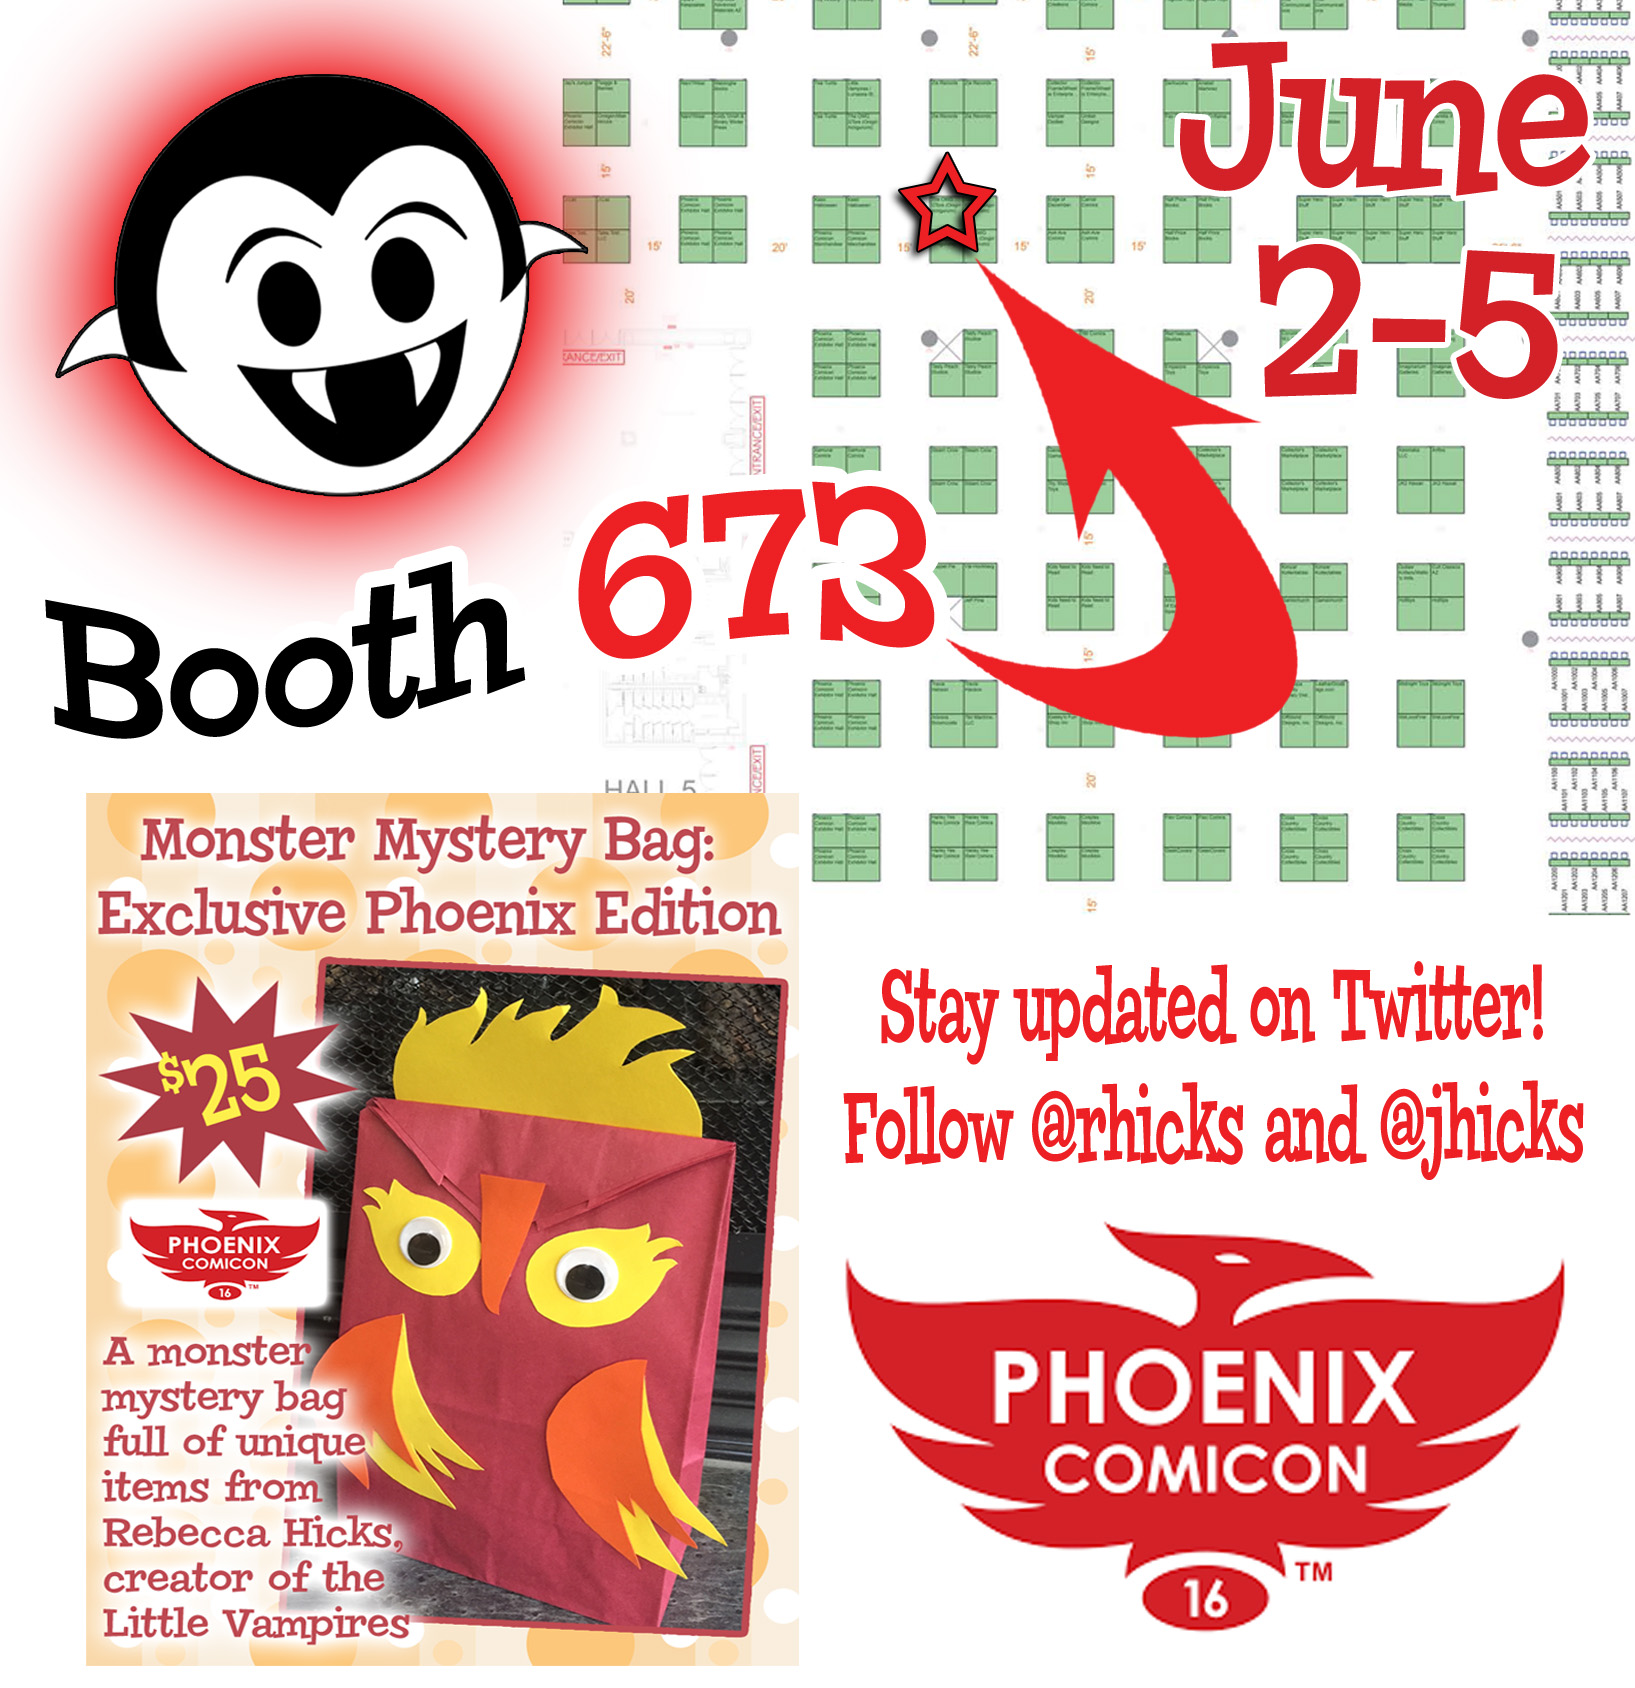 Phoenix Comicon 2016 exhibitor floor map with the Little Vampires booth highlighted